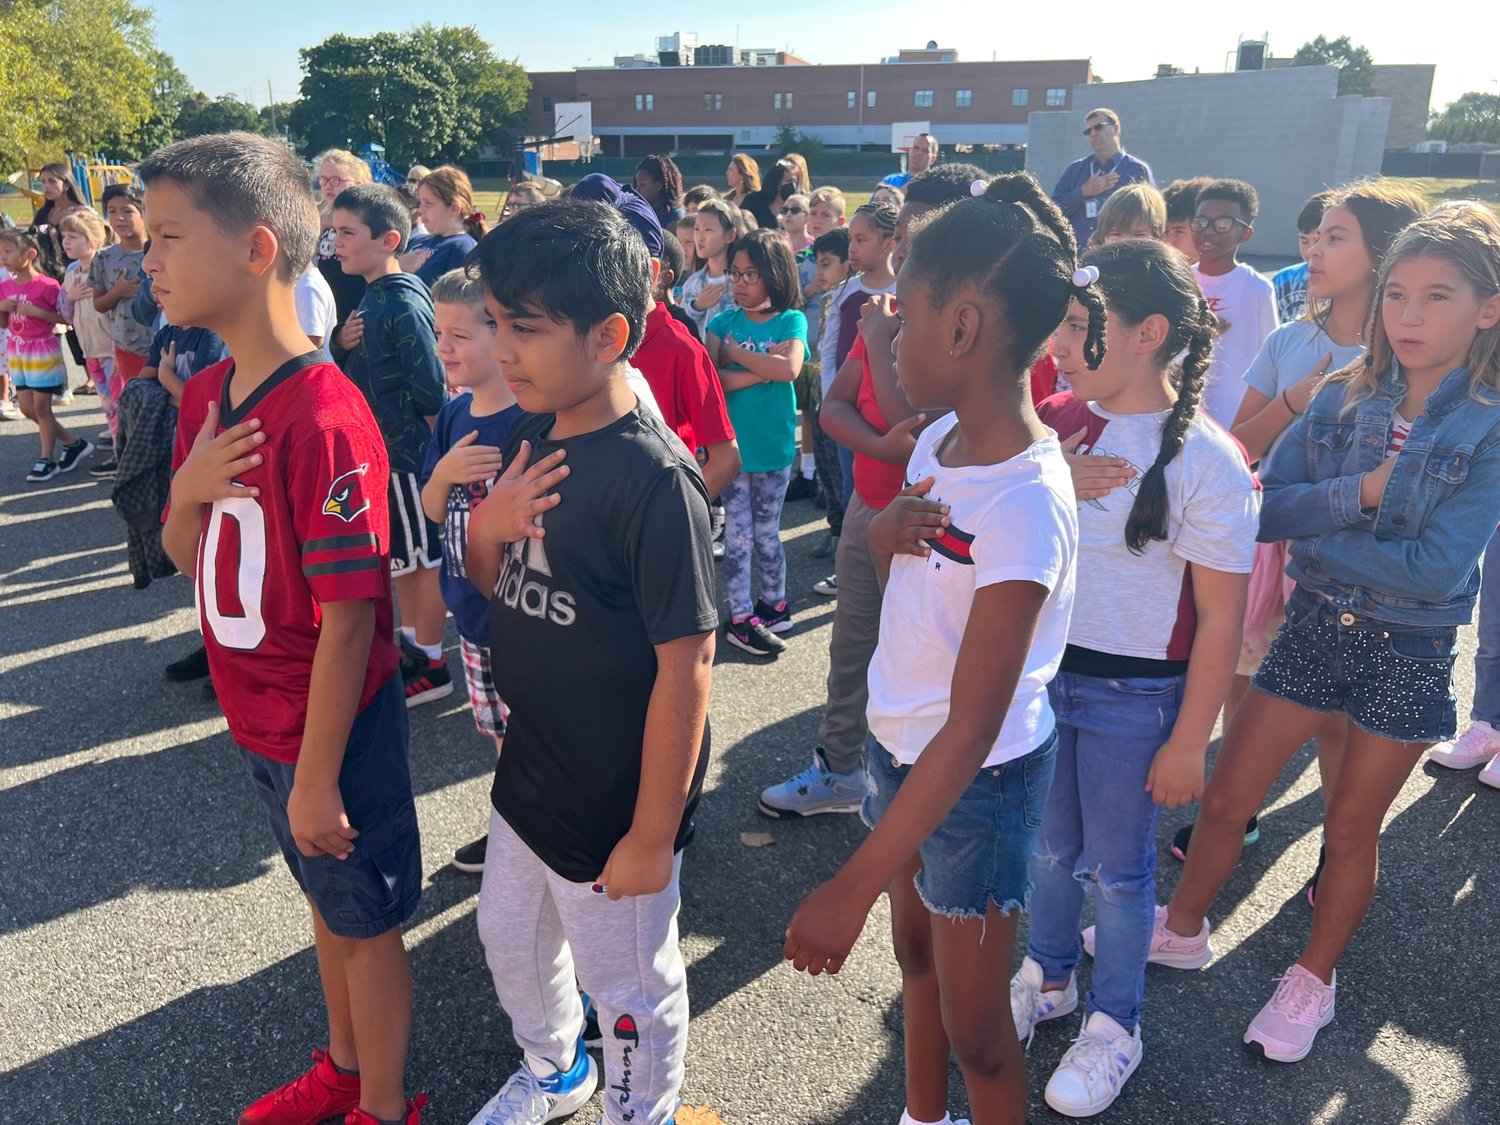 James A. Dever Elementary School students sung the national anthem and recited poems on the meaning of heroism seen throughout the country during the September 11 terrorist attacks.